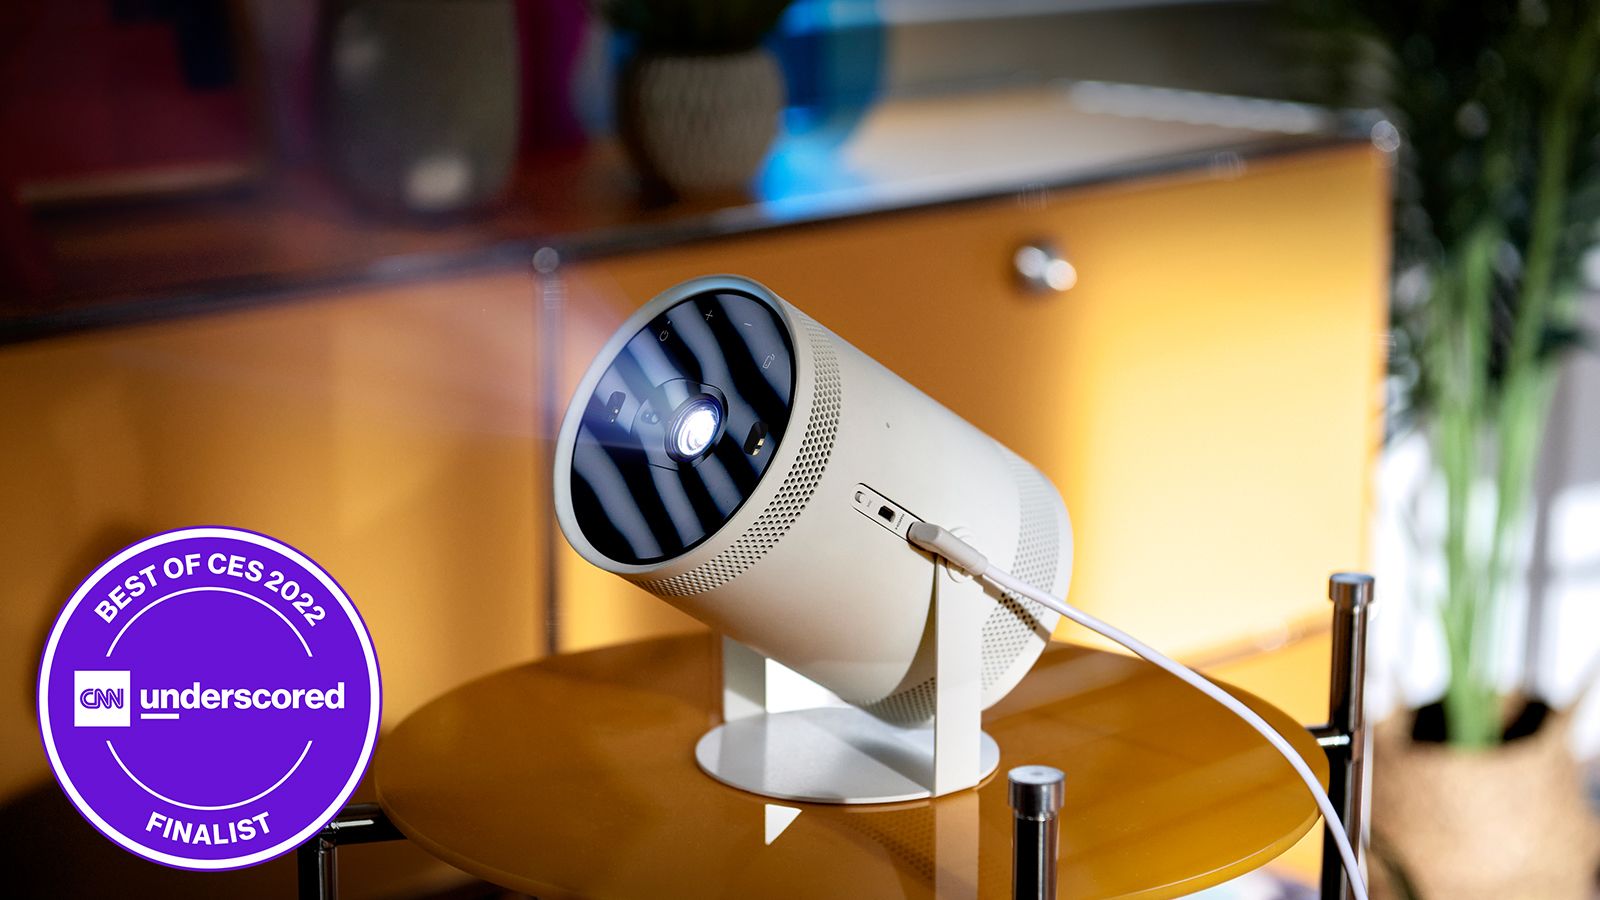 Samsung’s new Freestyle projector is ultra tiny, portable and the perfect home accessory